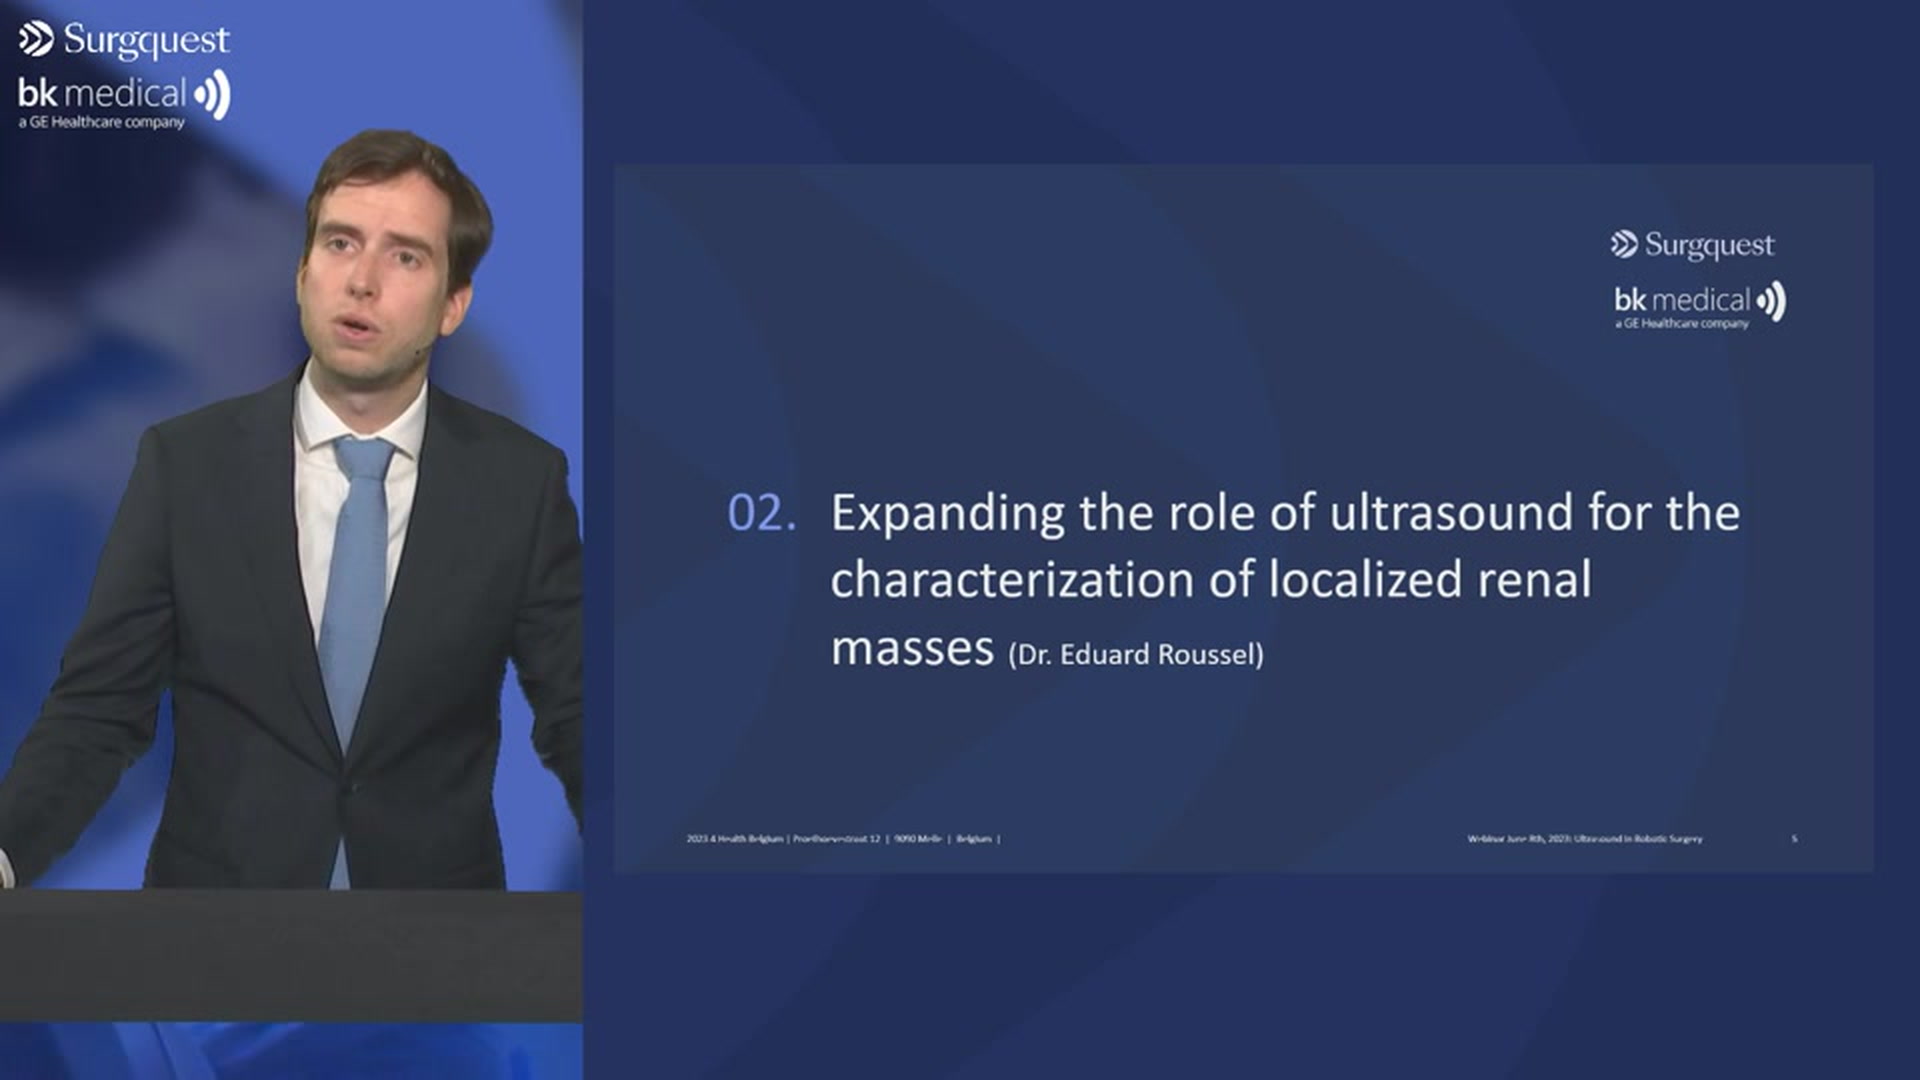 Use of Ultrasound in Robotic Renal Surgery